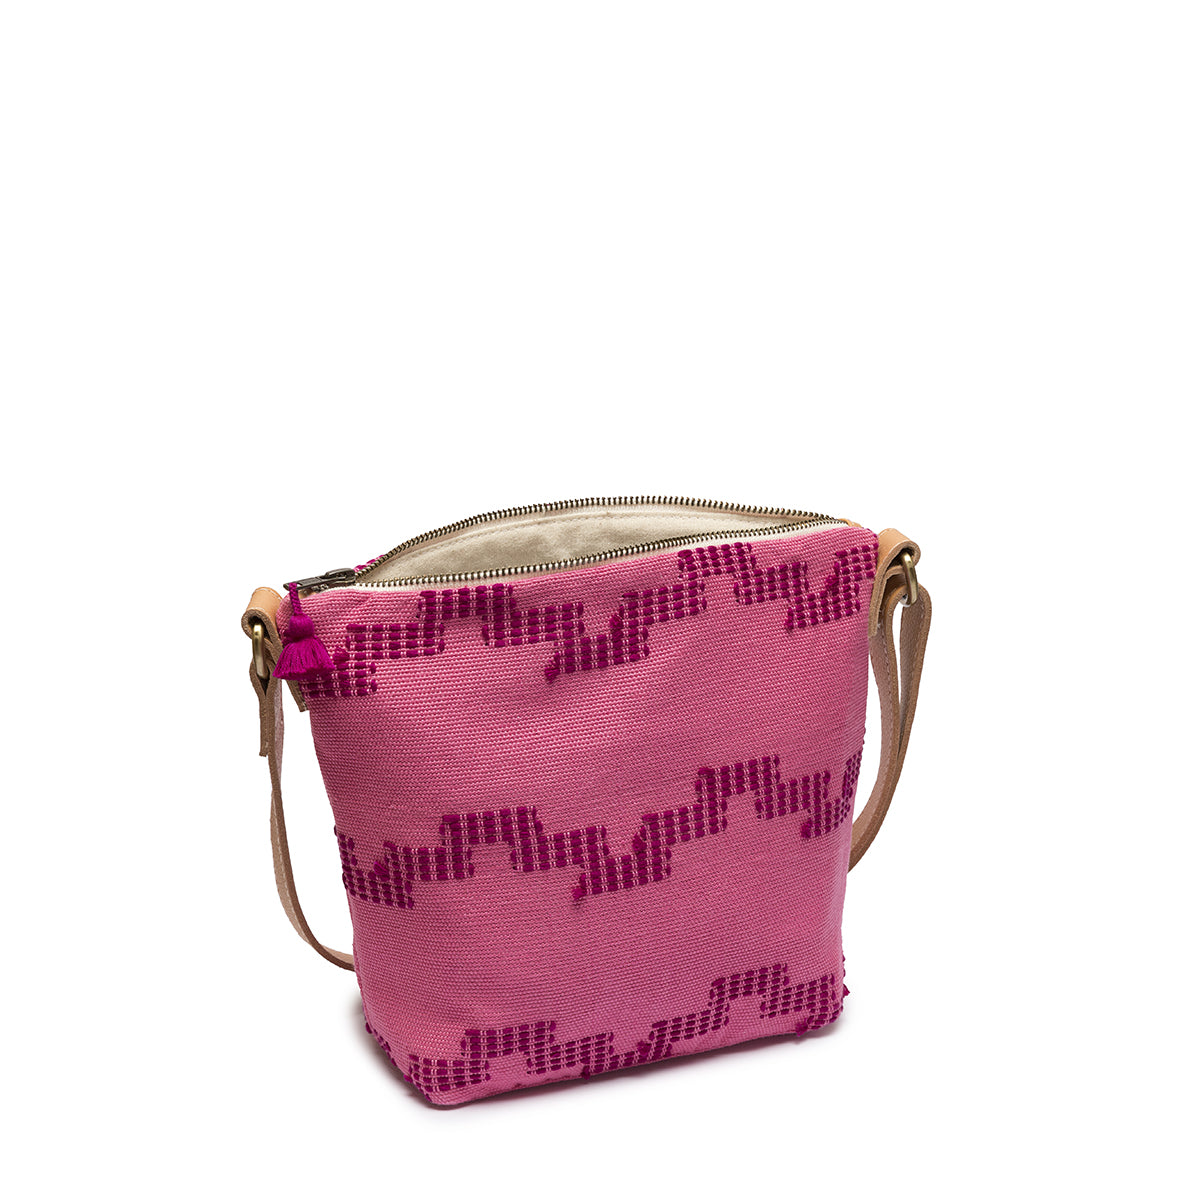 A side view of the hand woven artisan Mini Lidia Crossbody in Pitaya style. The zipper is open to reveal the interior with beige lining. 